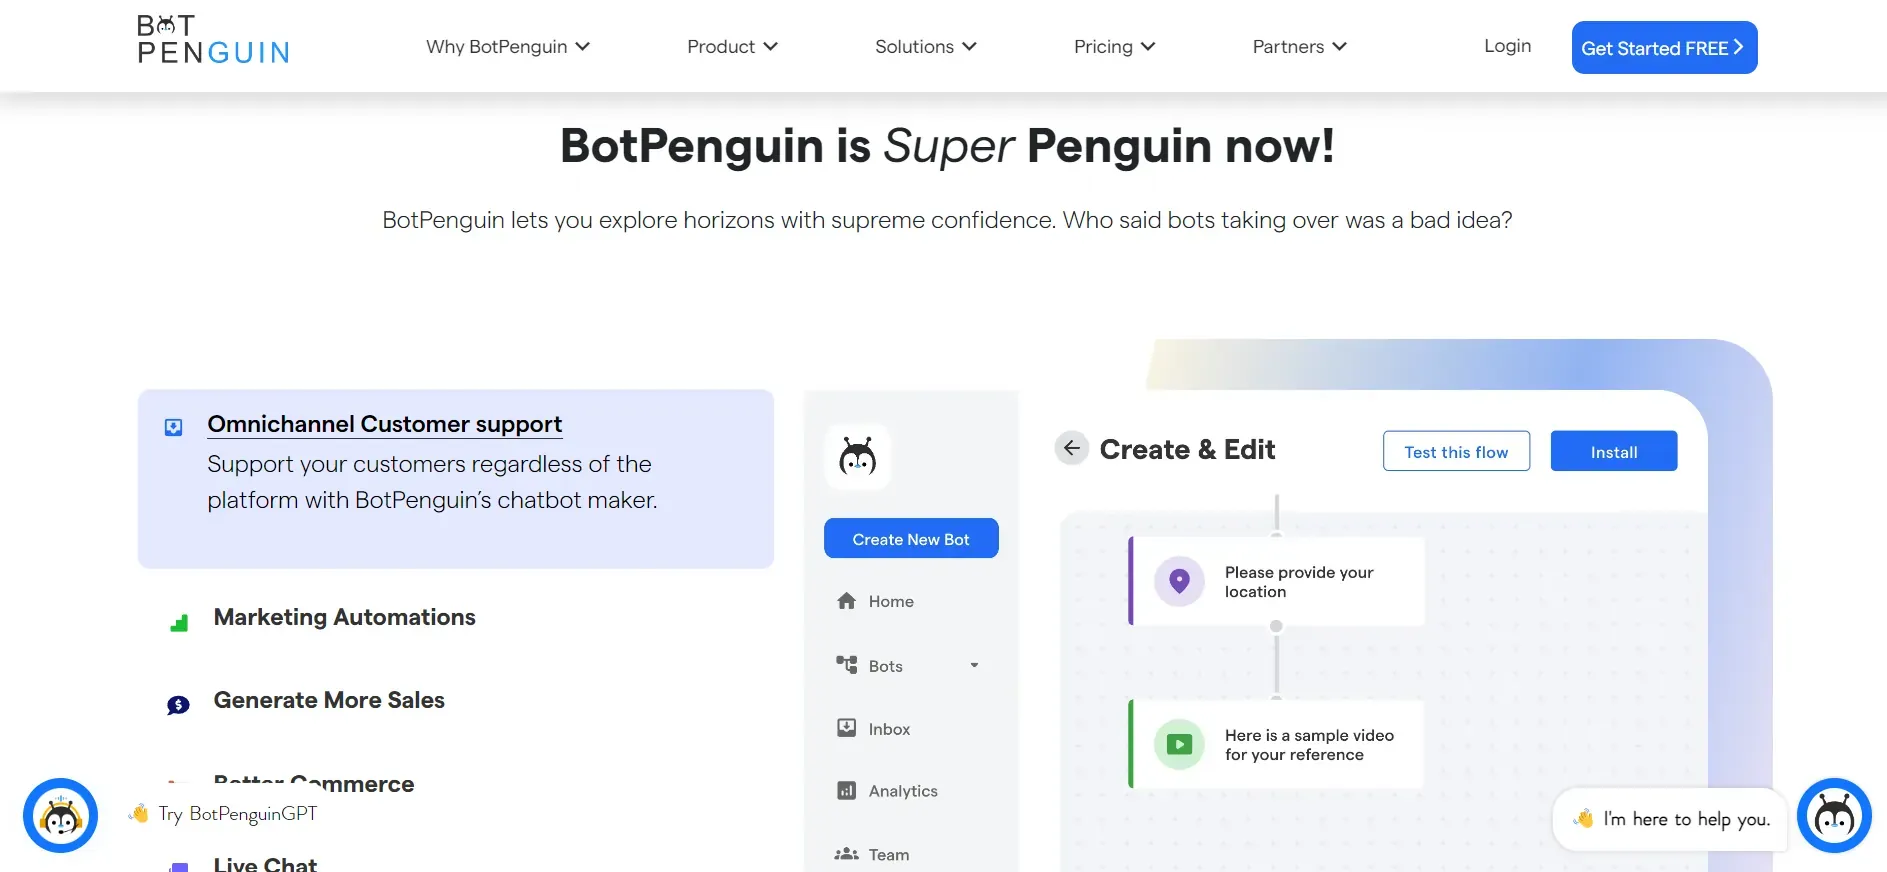 Features of BotPenguin